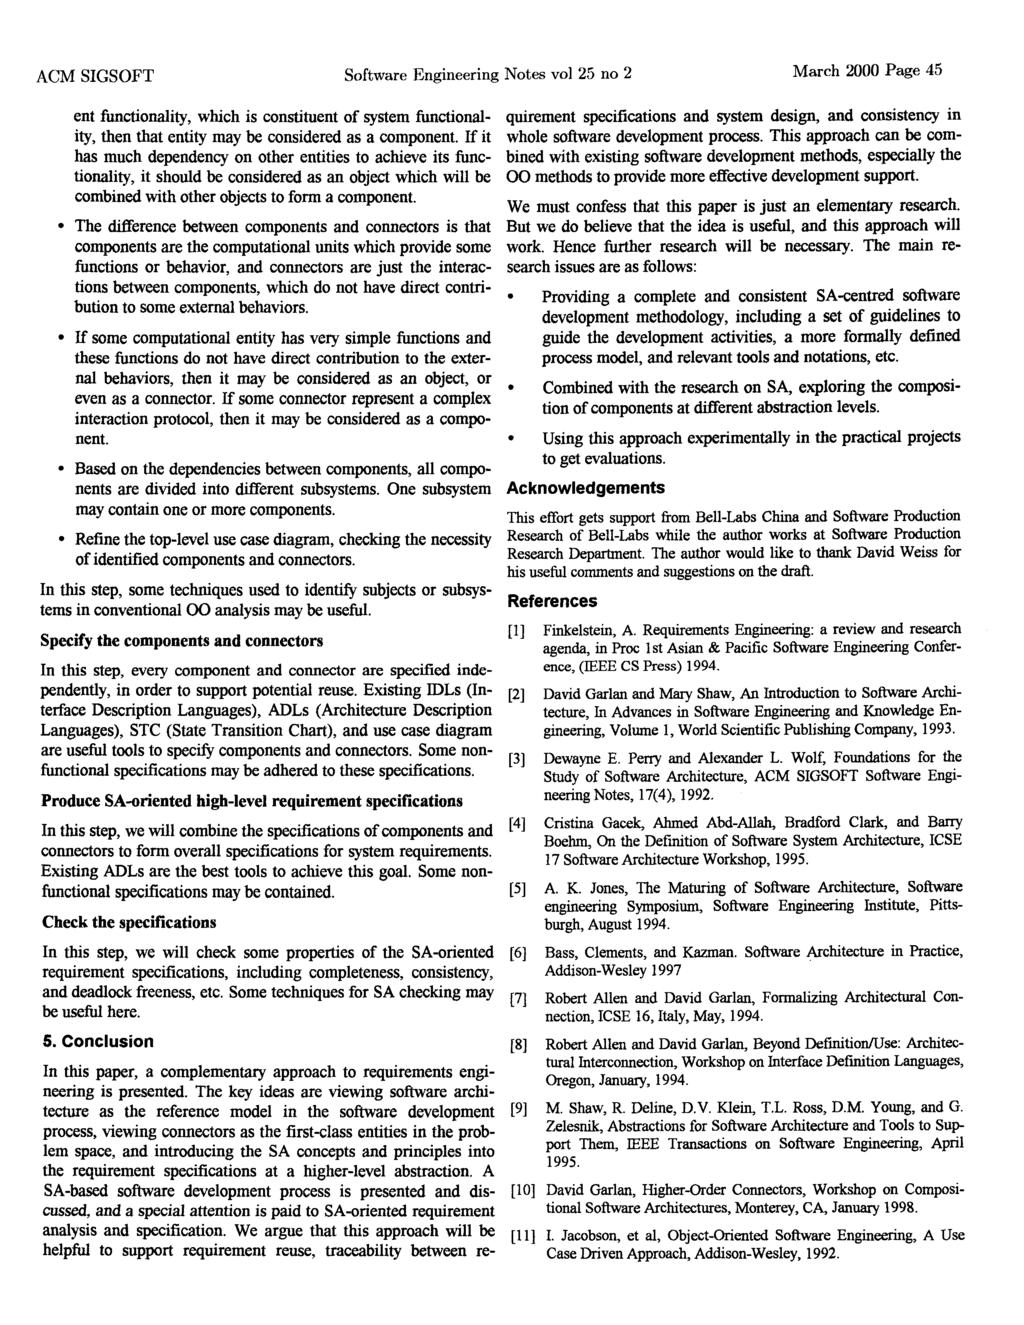 ACM SIGSOFT Software Engineering Notes vol 25 no 2 March 2000 Page 45 ent functionality, which is constituent of system functionality, then that entity may be considered as a component.